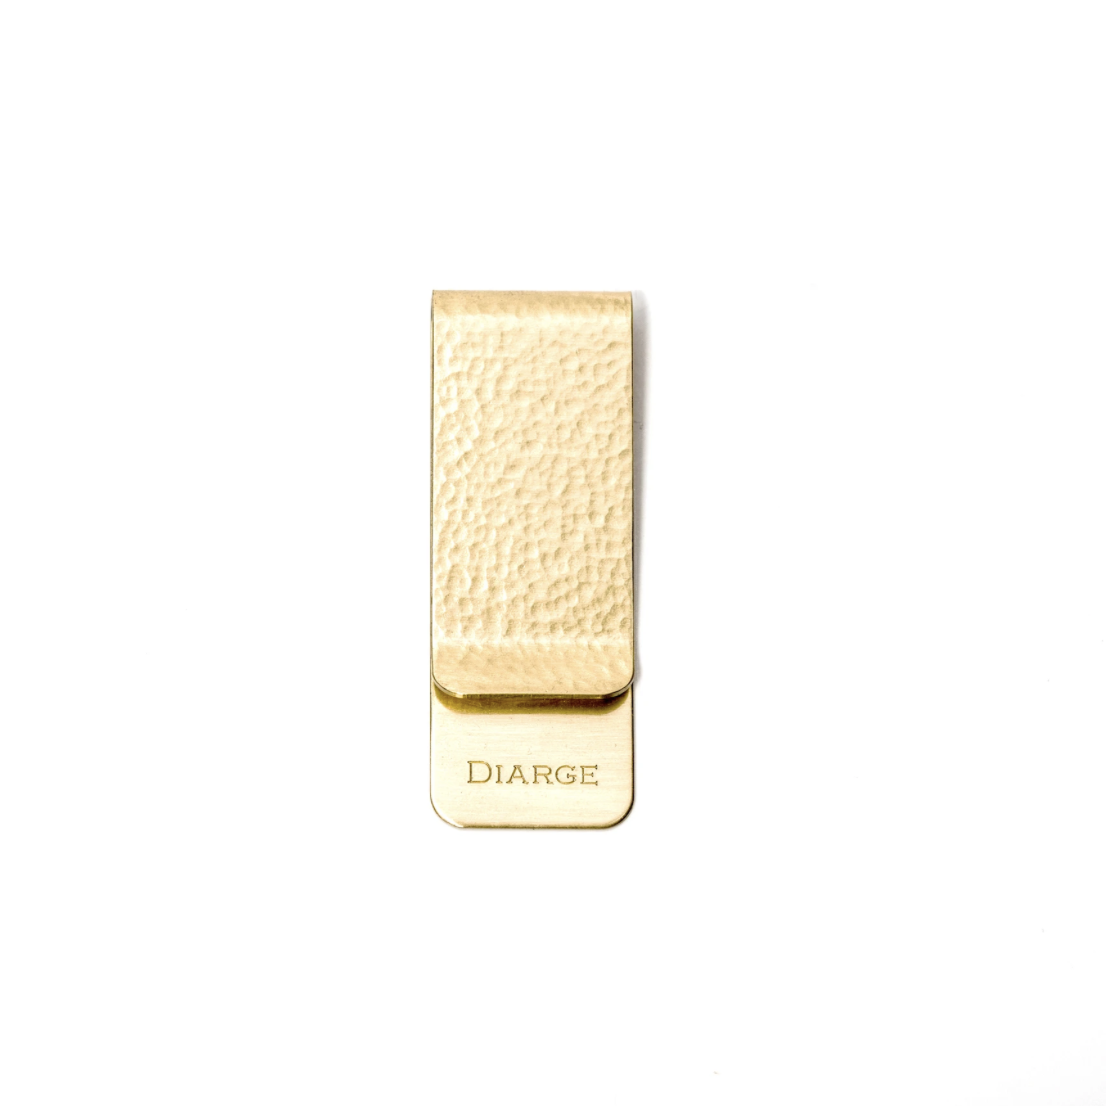 Diarge Japan Chased Brass Money Clip - Gold